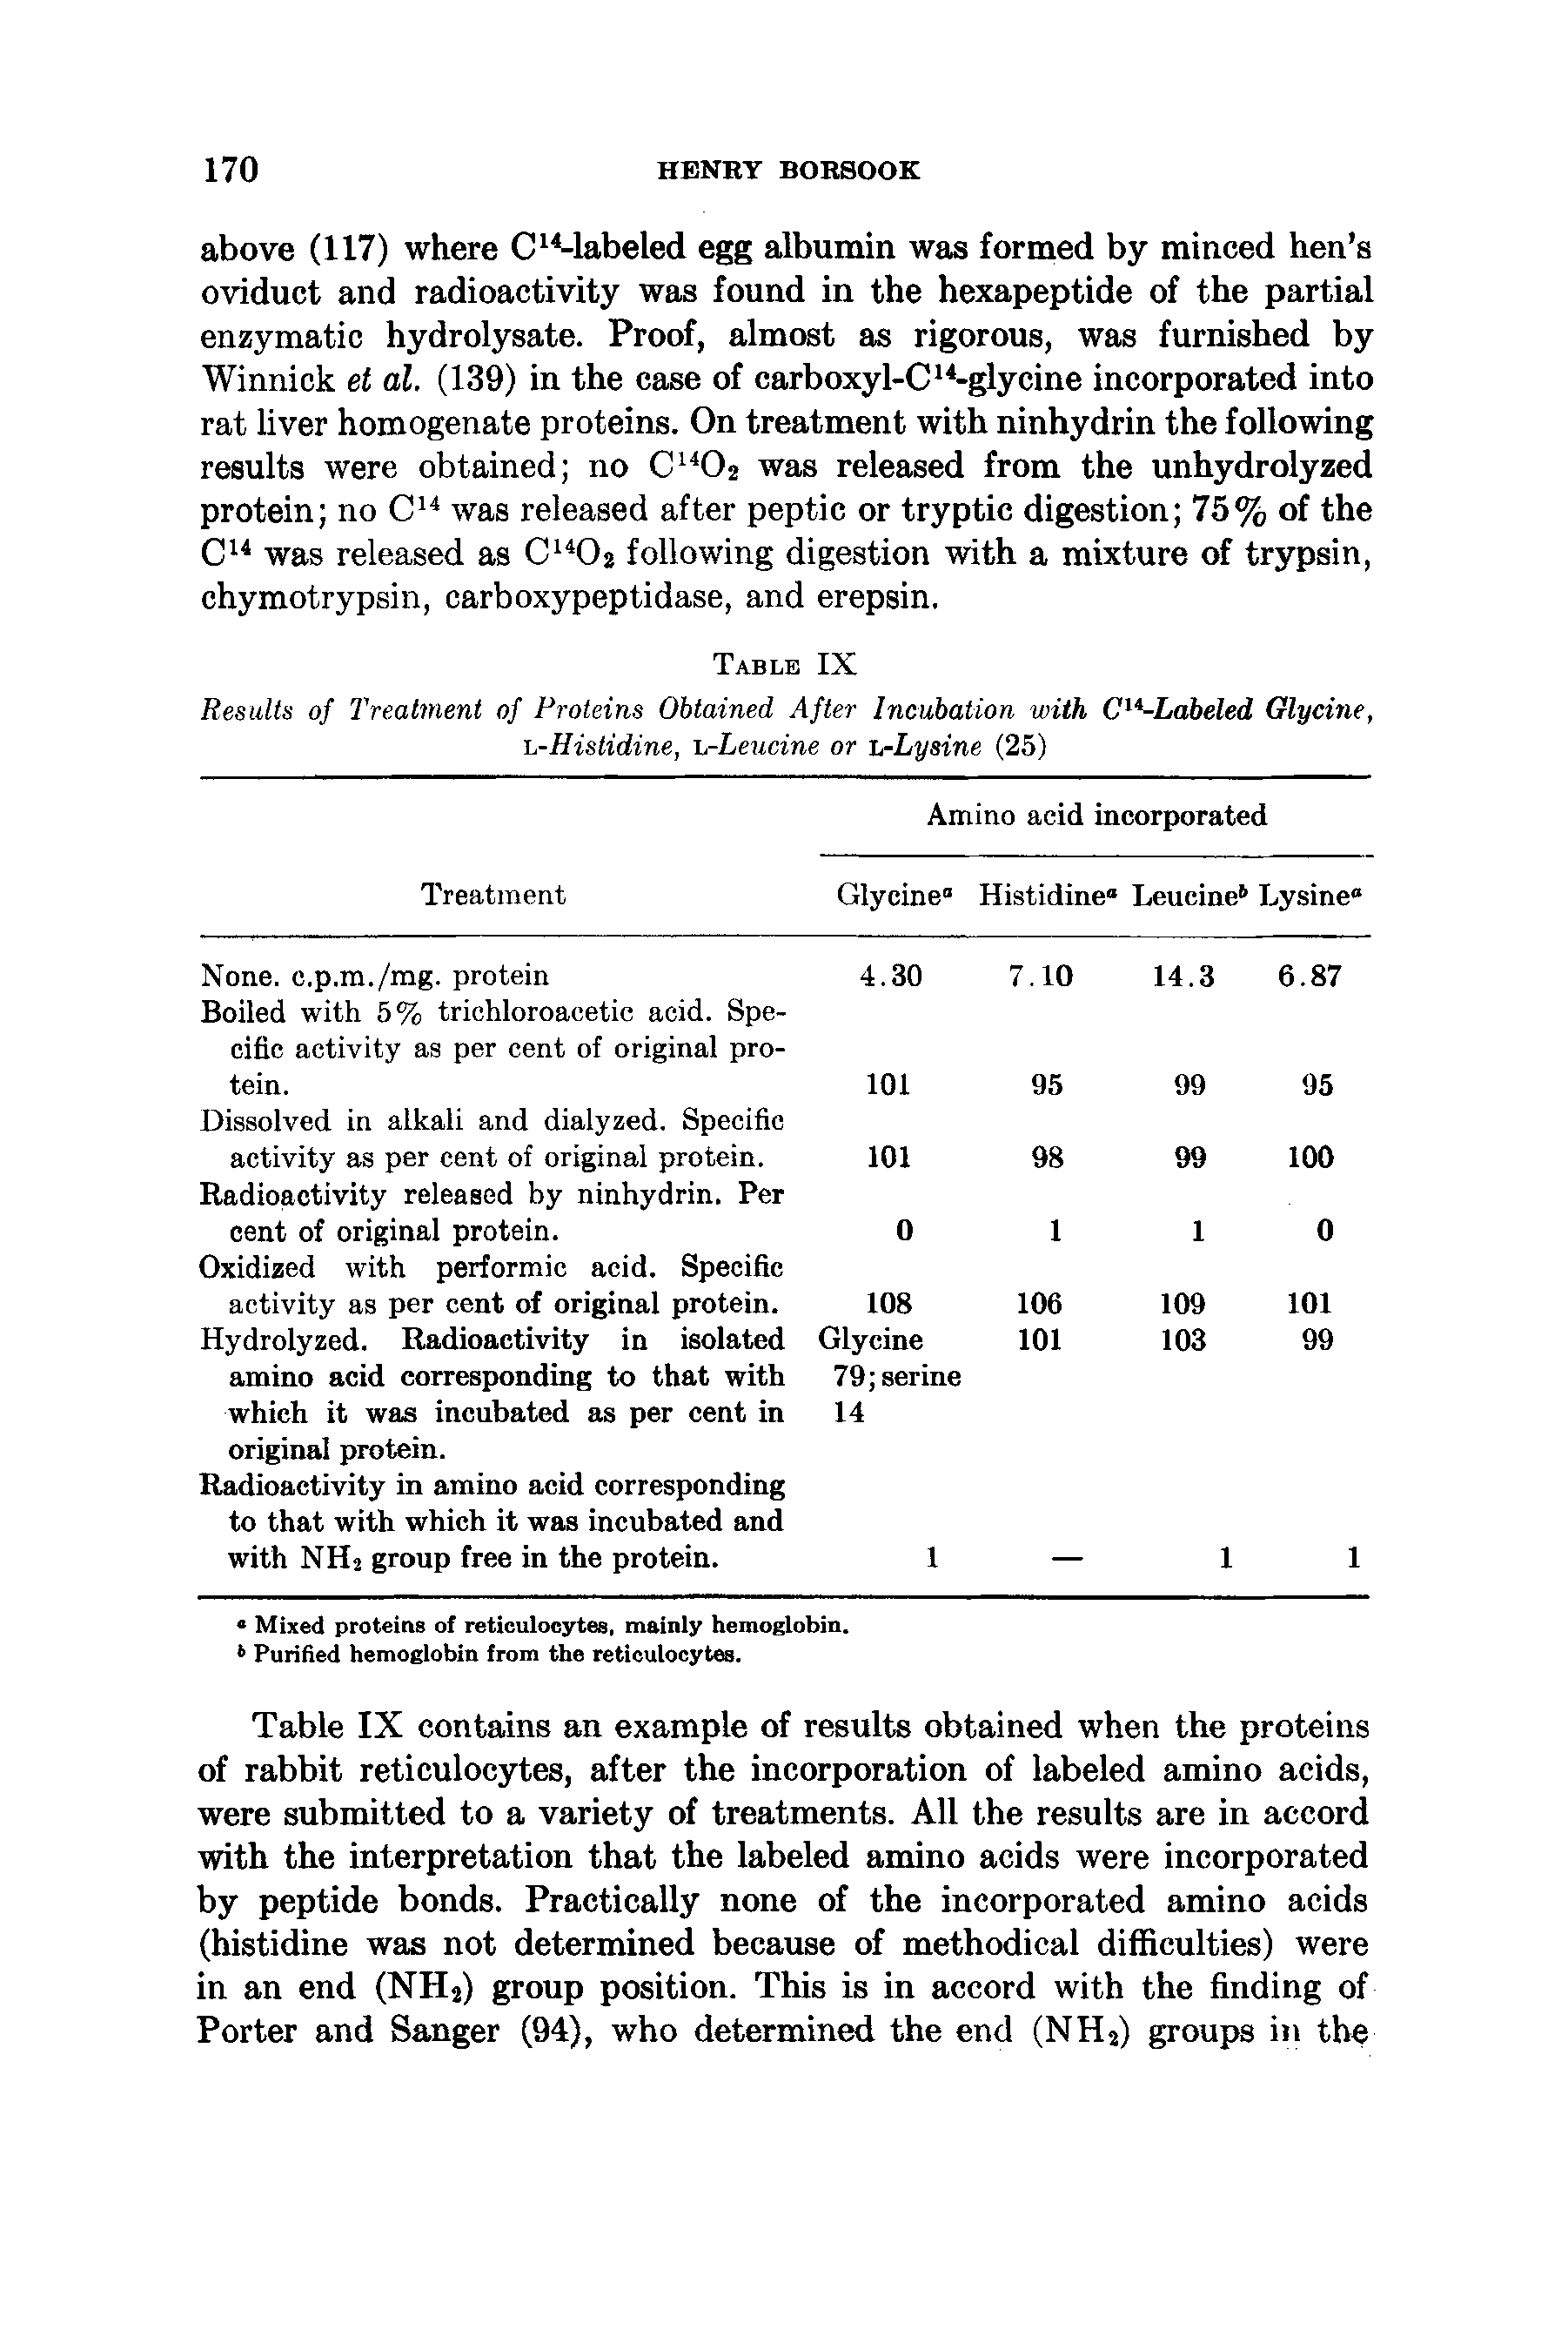 Table IX contains an example of results obtained when the proteins of rabbit reticulocytes, after the incorporation of labeled amino acids, were submitted to a variety of treatments. All the results are in accord with the interpretation that the labeled amino acids were incorporated by peptide bonds. Practically none of the incorporated amino acids (histidine was not determined because of methodical difficulties) were in an end (NHj) group position. This is in accord with the finding of Porter and Sanger (94), who determined the end (NH2) groups in the...